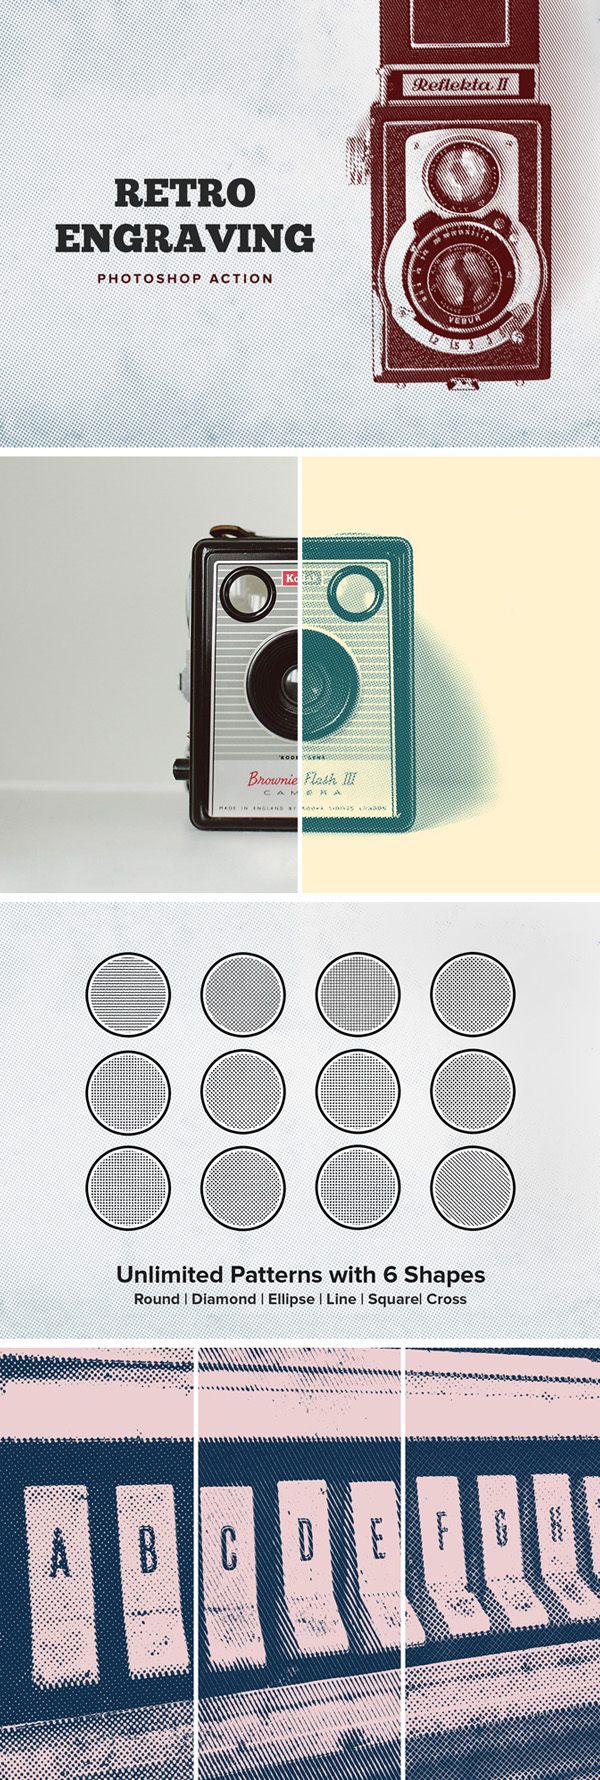 Freebies for 2019: Free Retro Engraving Photoshop Action